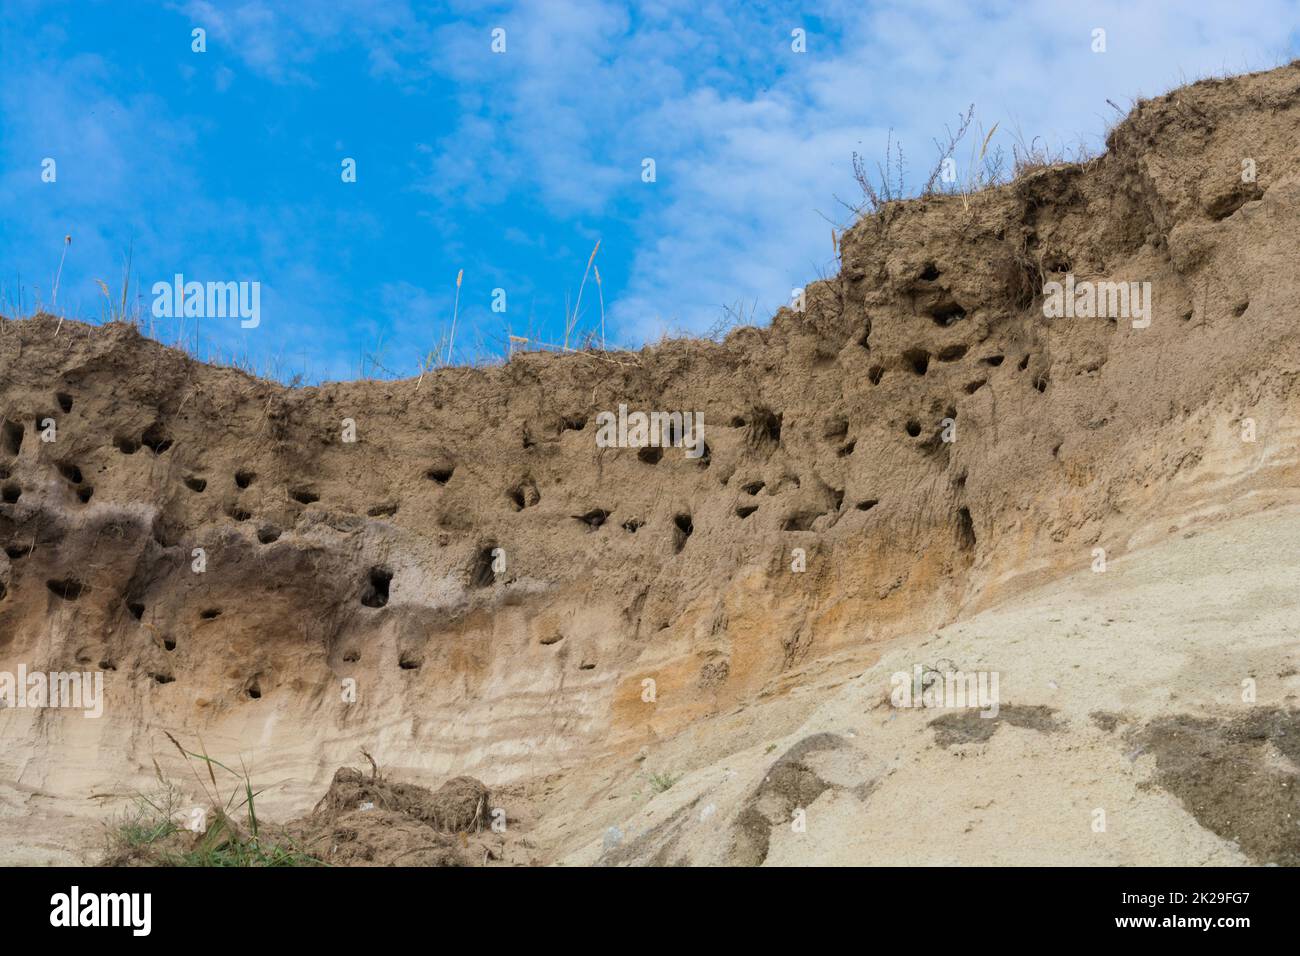 Cliff of Ahrenshoop city on the Baltic Sea peninsula Darss in Germany in summer. Stock Photo